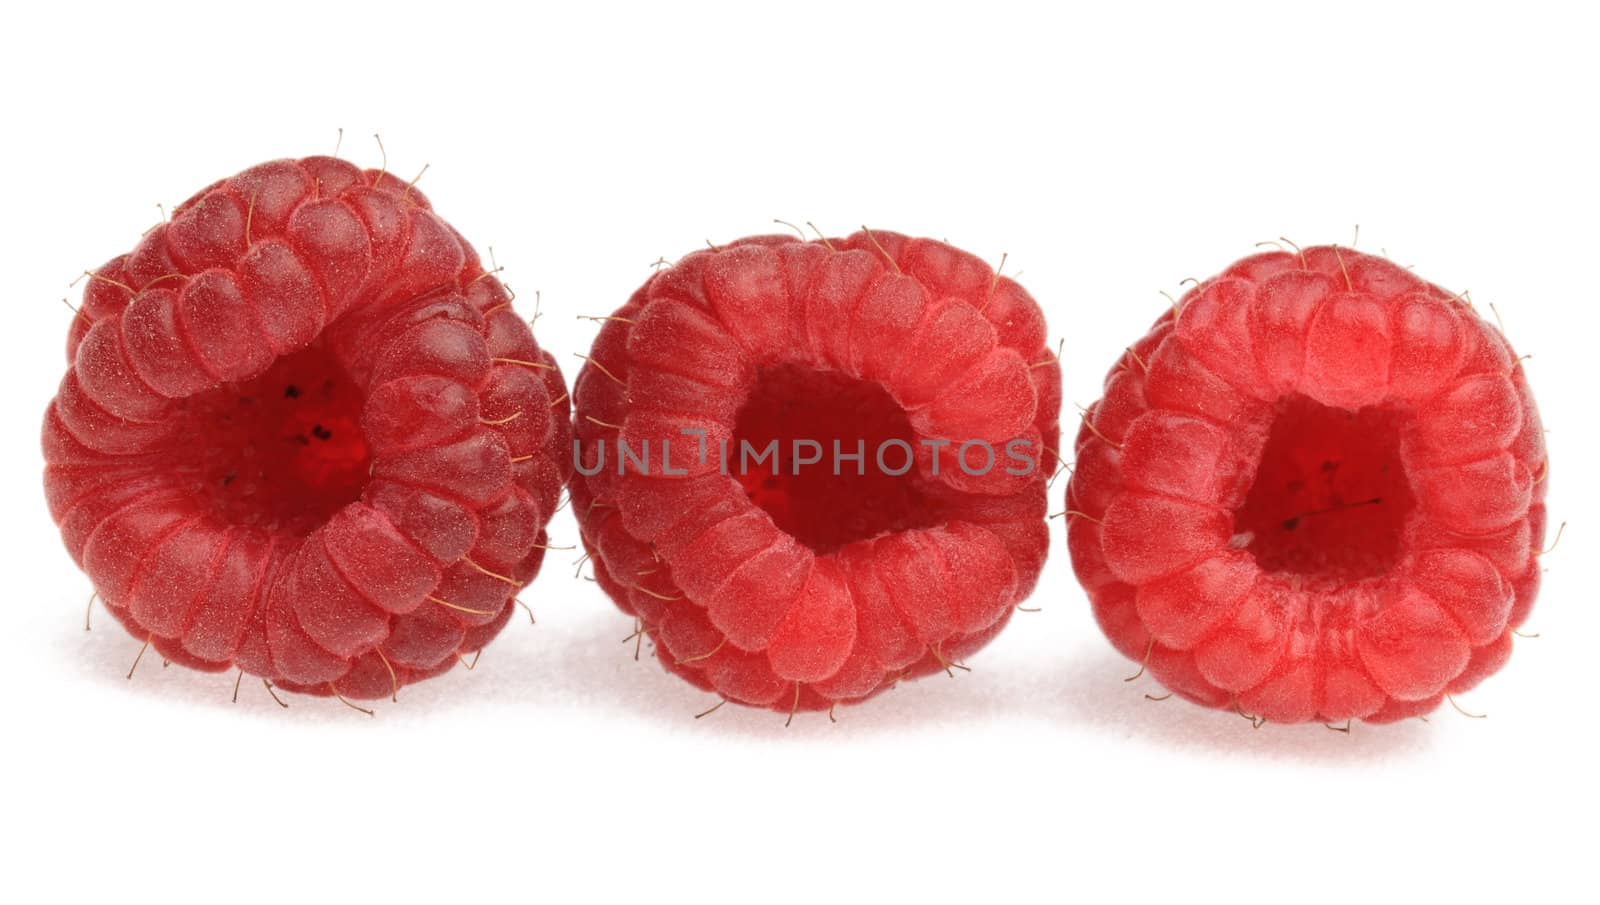 Macro shot of three raspberries photographed in a studio against a white background.